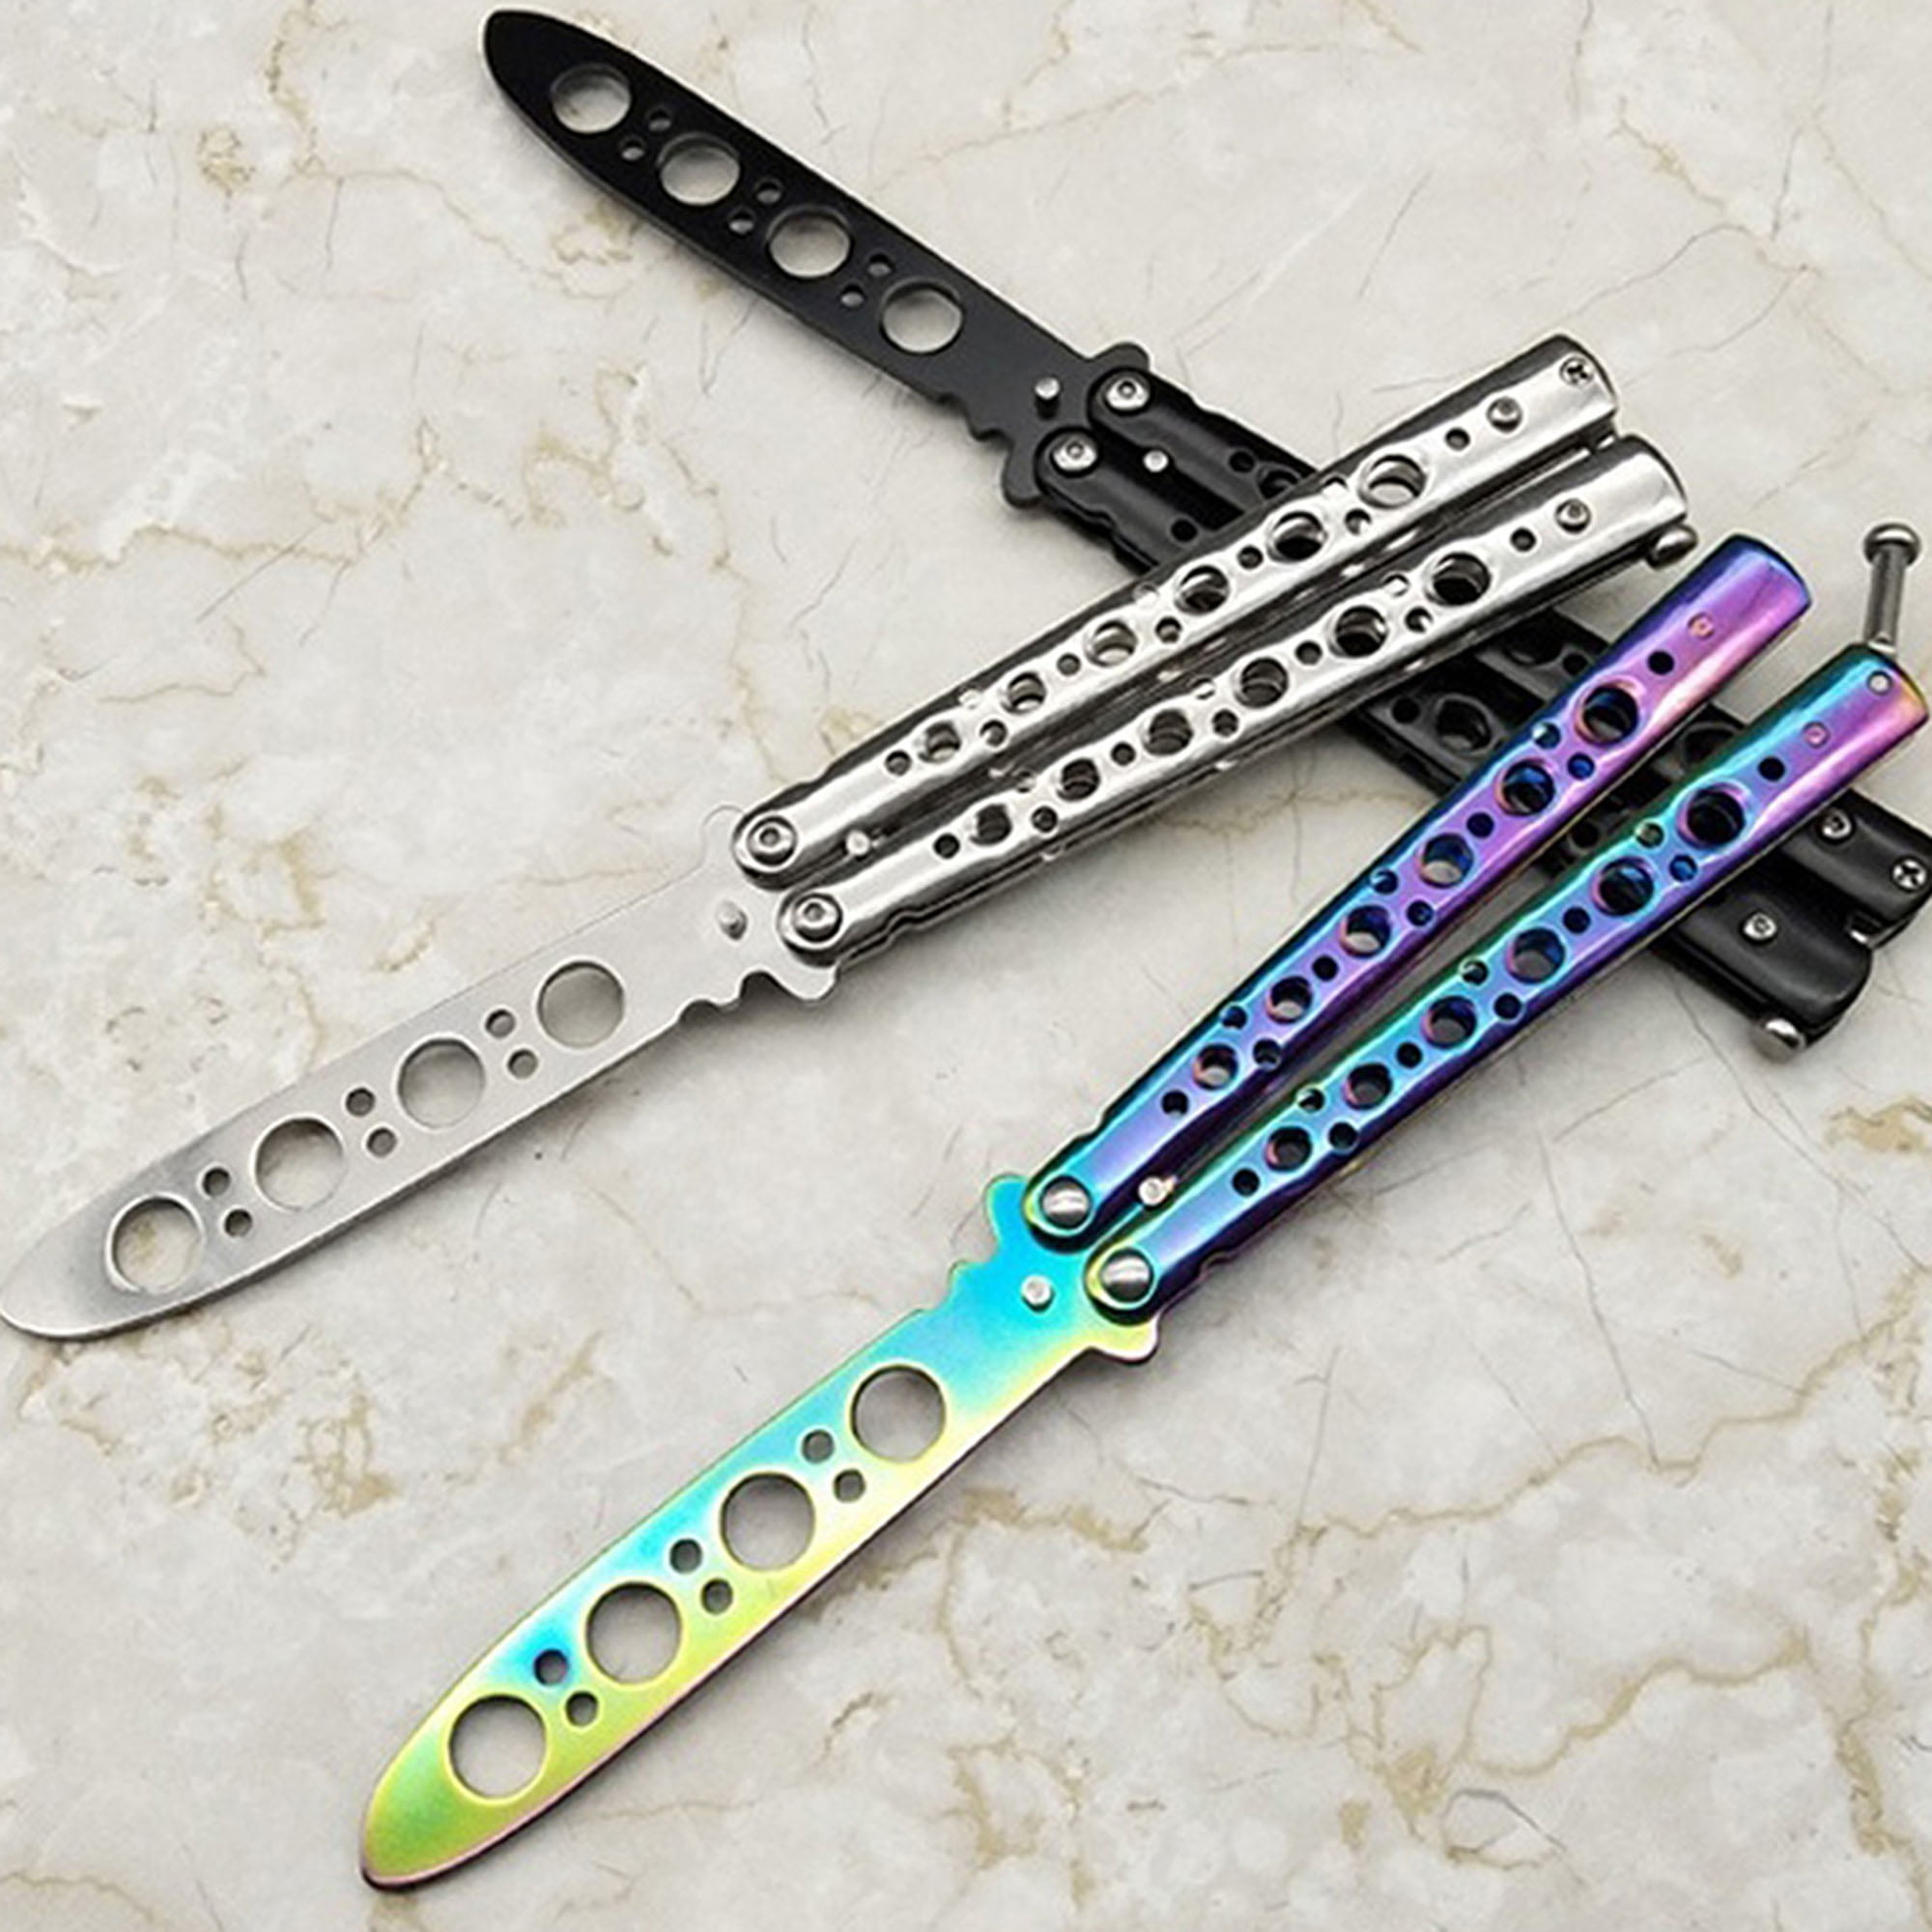 NK Butterfly Knife Trainning Practice Comb Unsharpened Blade for